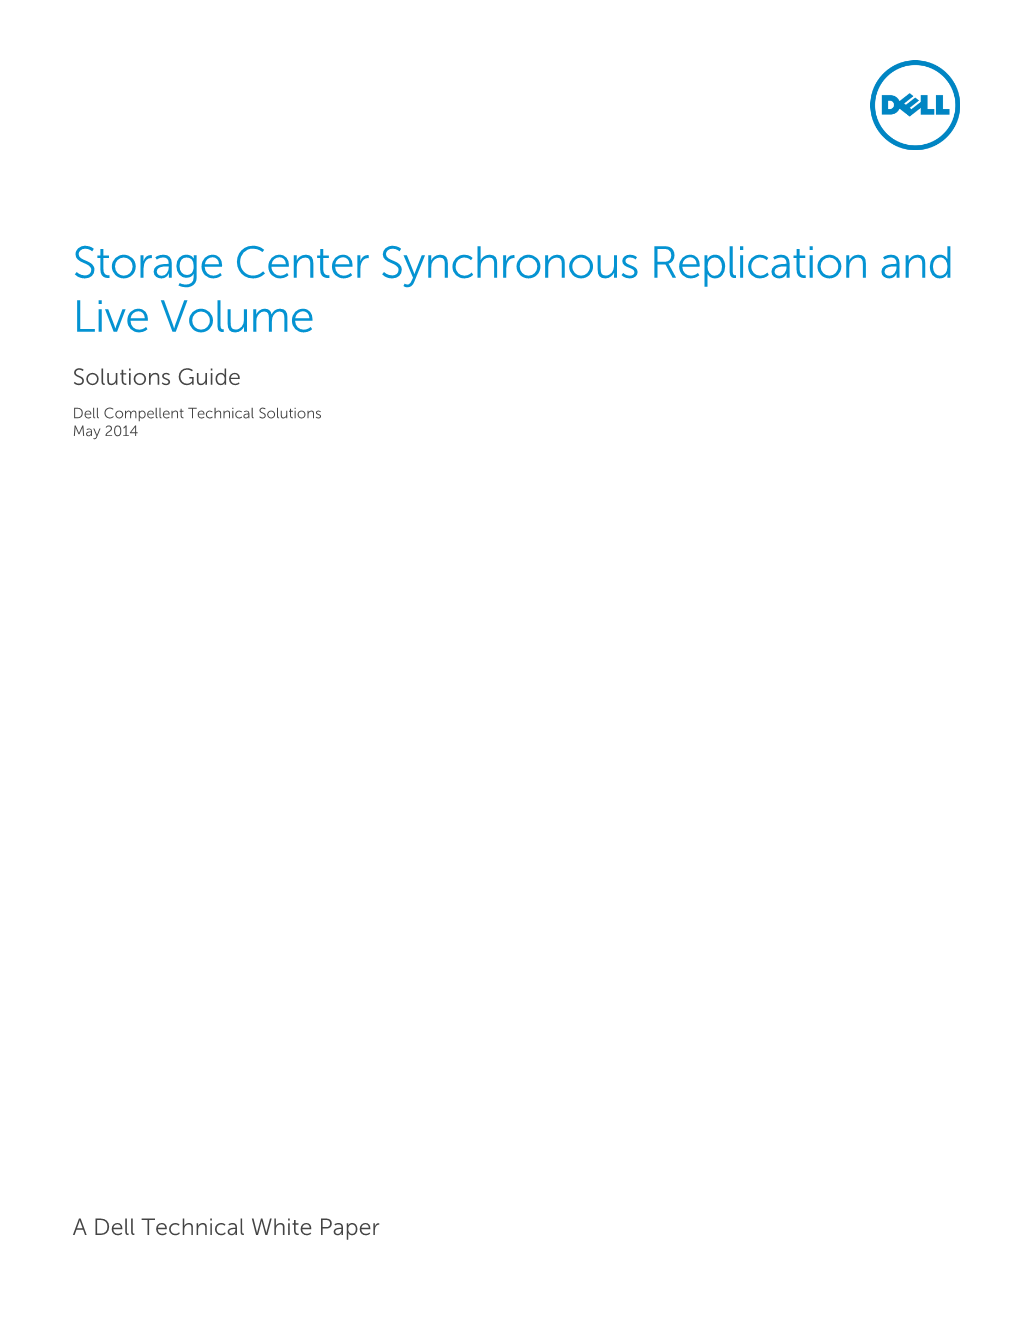 Storage Center Synchronous Replication and Live Volume